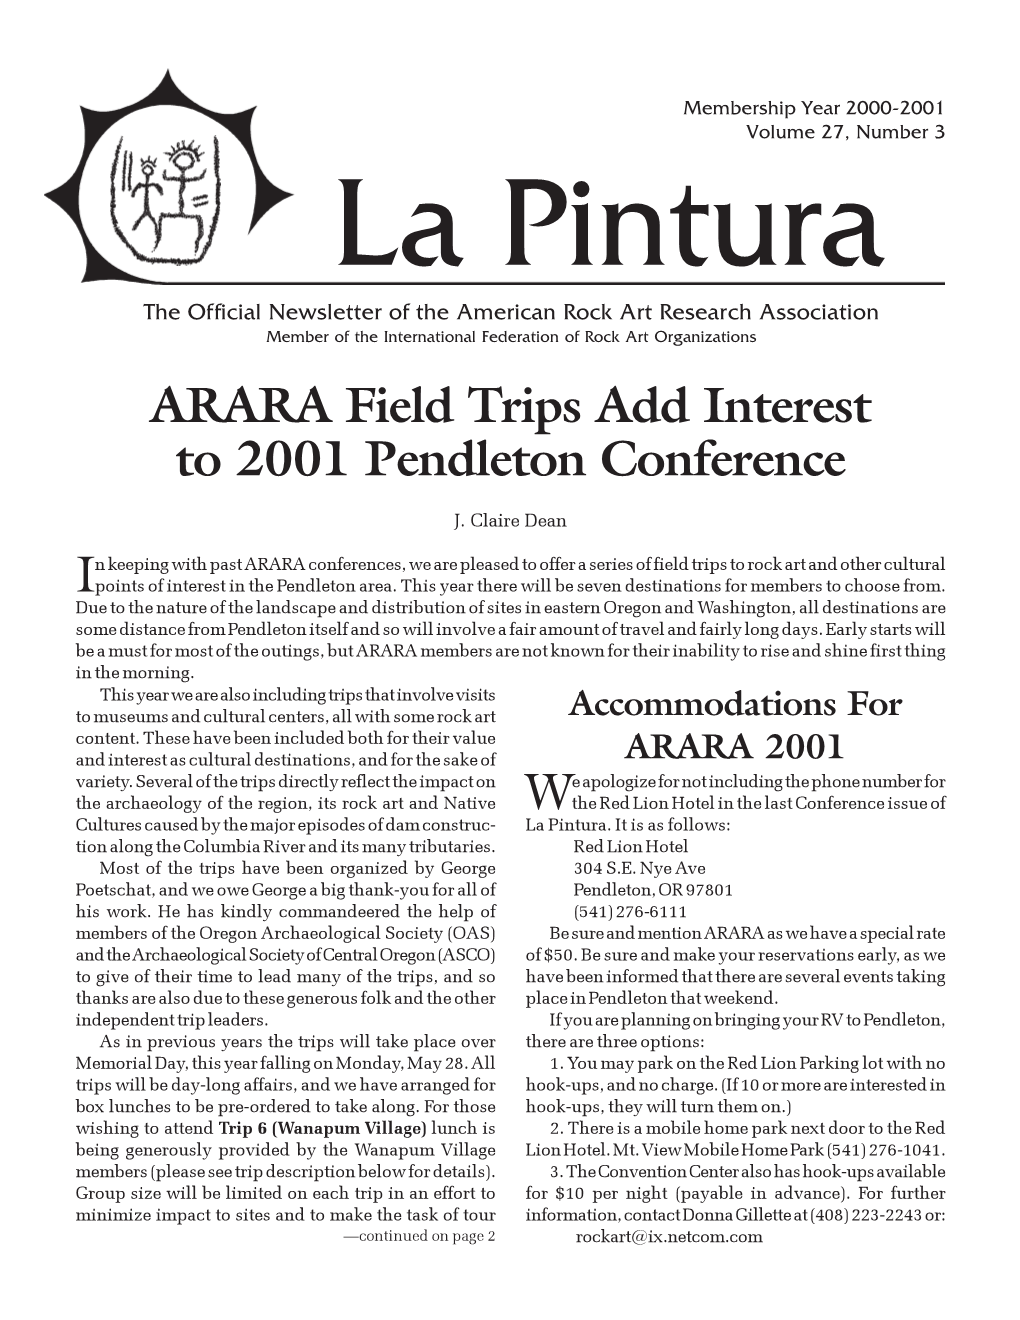 ARARA Field Trips Add Interest to 2001 Pendleton Conference